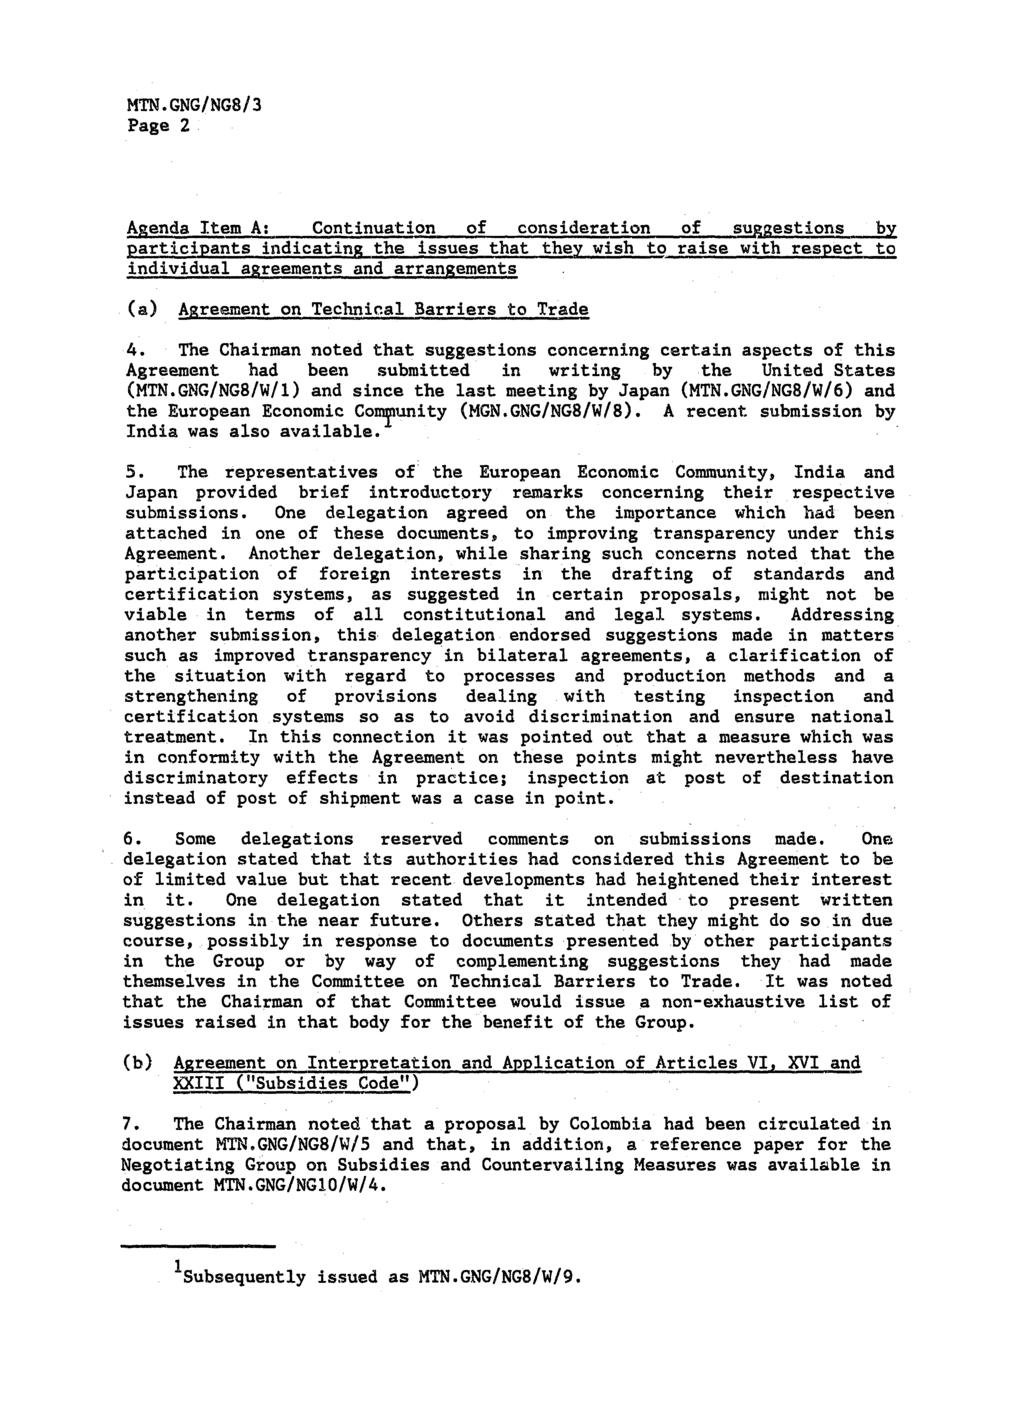 Page 2: Agenda Item A: Continuation of consideration of suggestions by participants indicating the issues that they wish to raise with respect to individual agreements and arrangements (a) Agreement